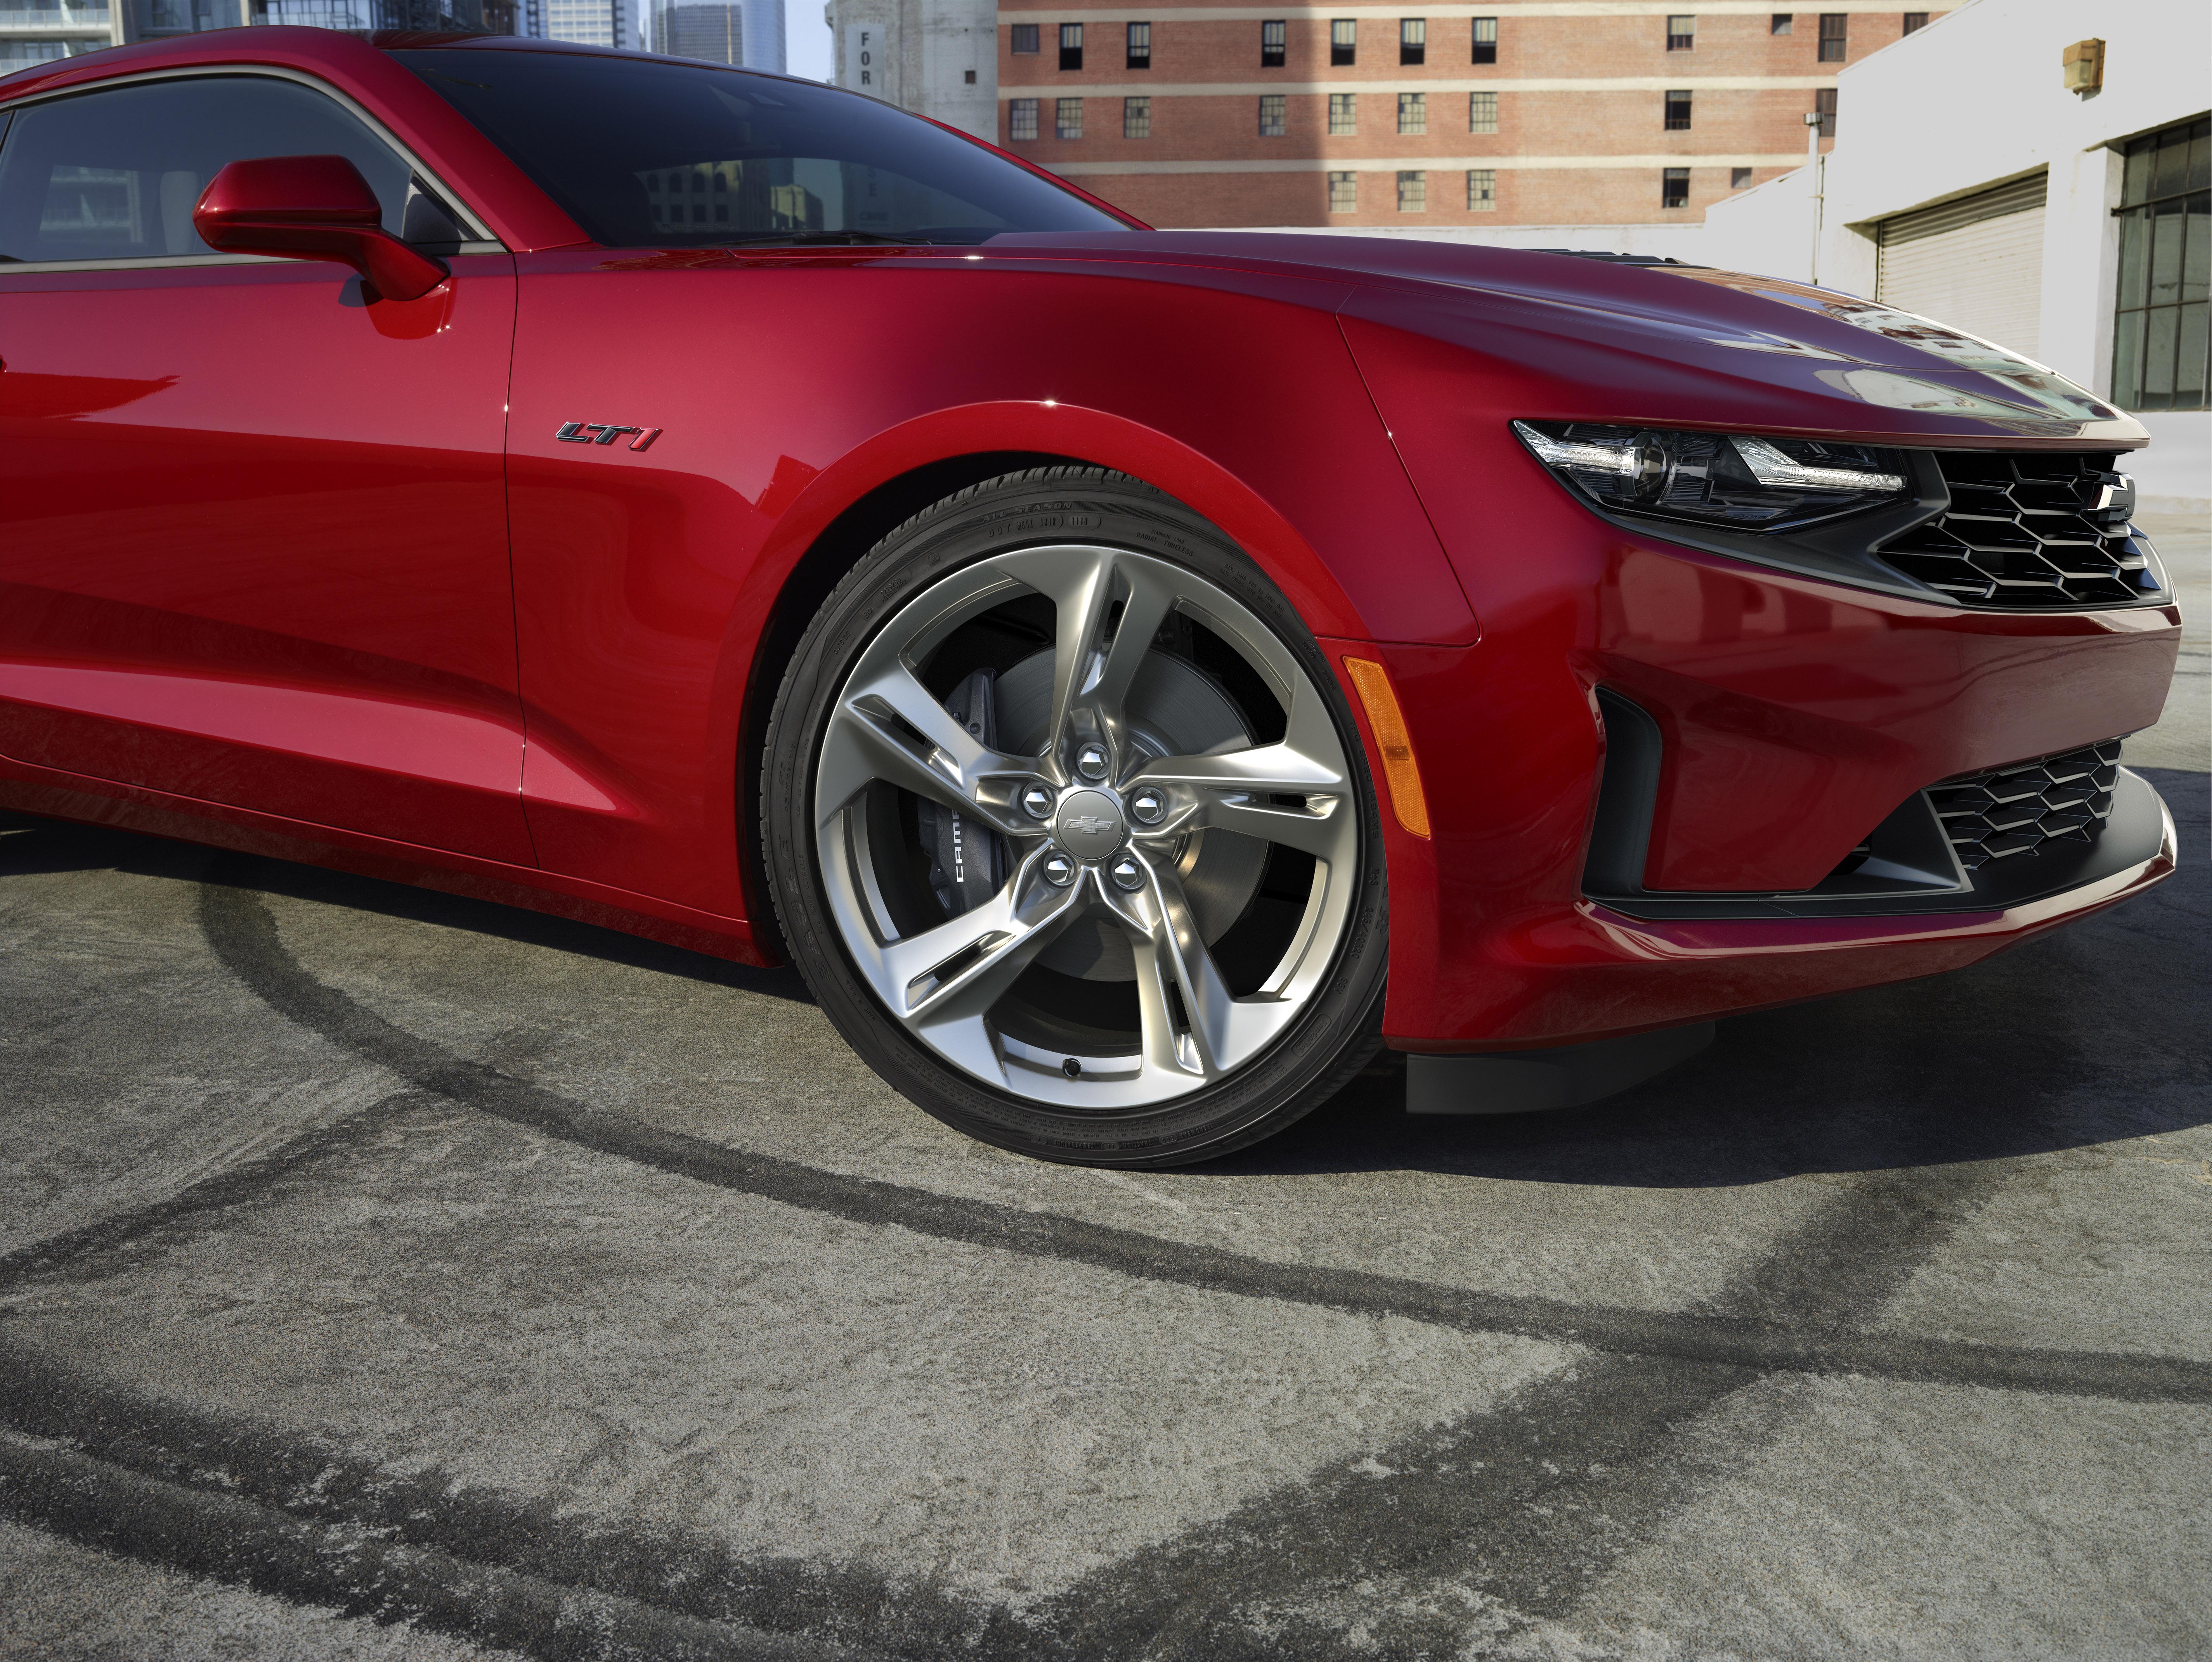 SS Styling Changes Lead 2020 Camaro Updates